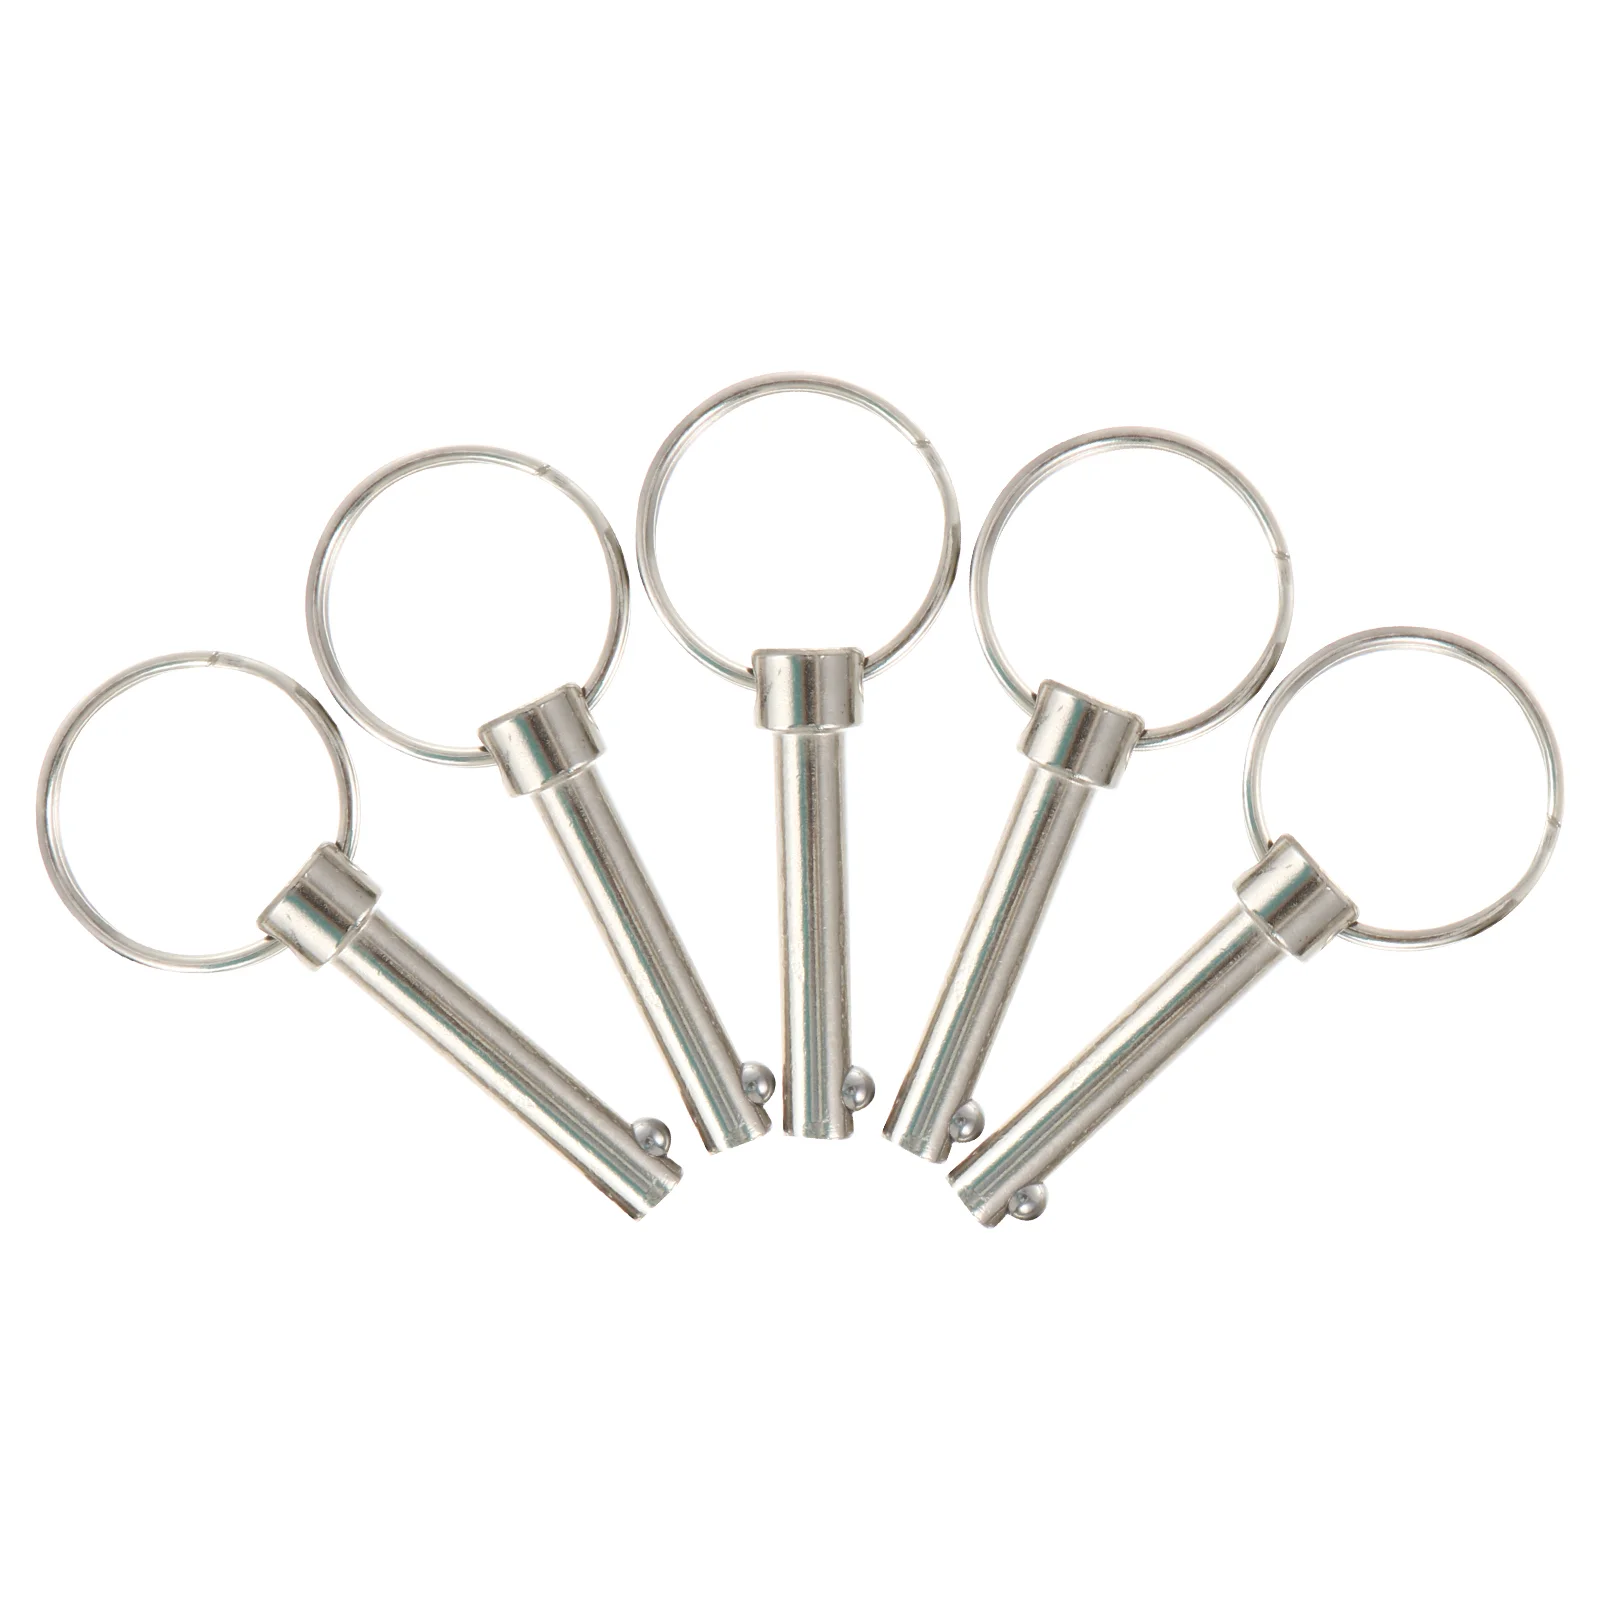 5 Pcs Ring Pin Carbon Steel Bimini Tops Connection Coupler Shipbuilding Locking Safety for Outfitting frameless safety leisure finger ring slingshot stainless steel shooting catapult